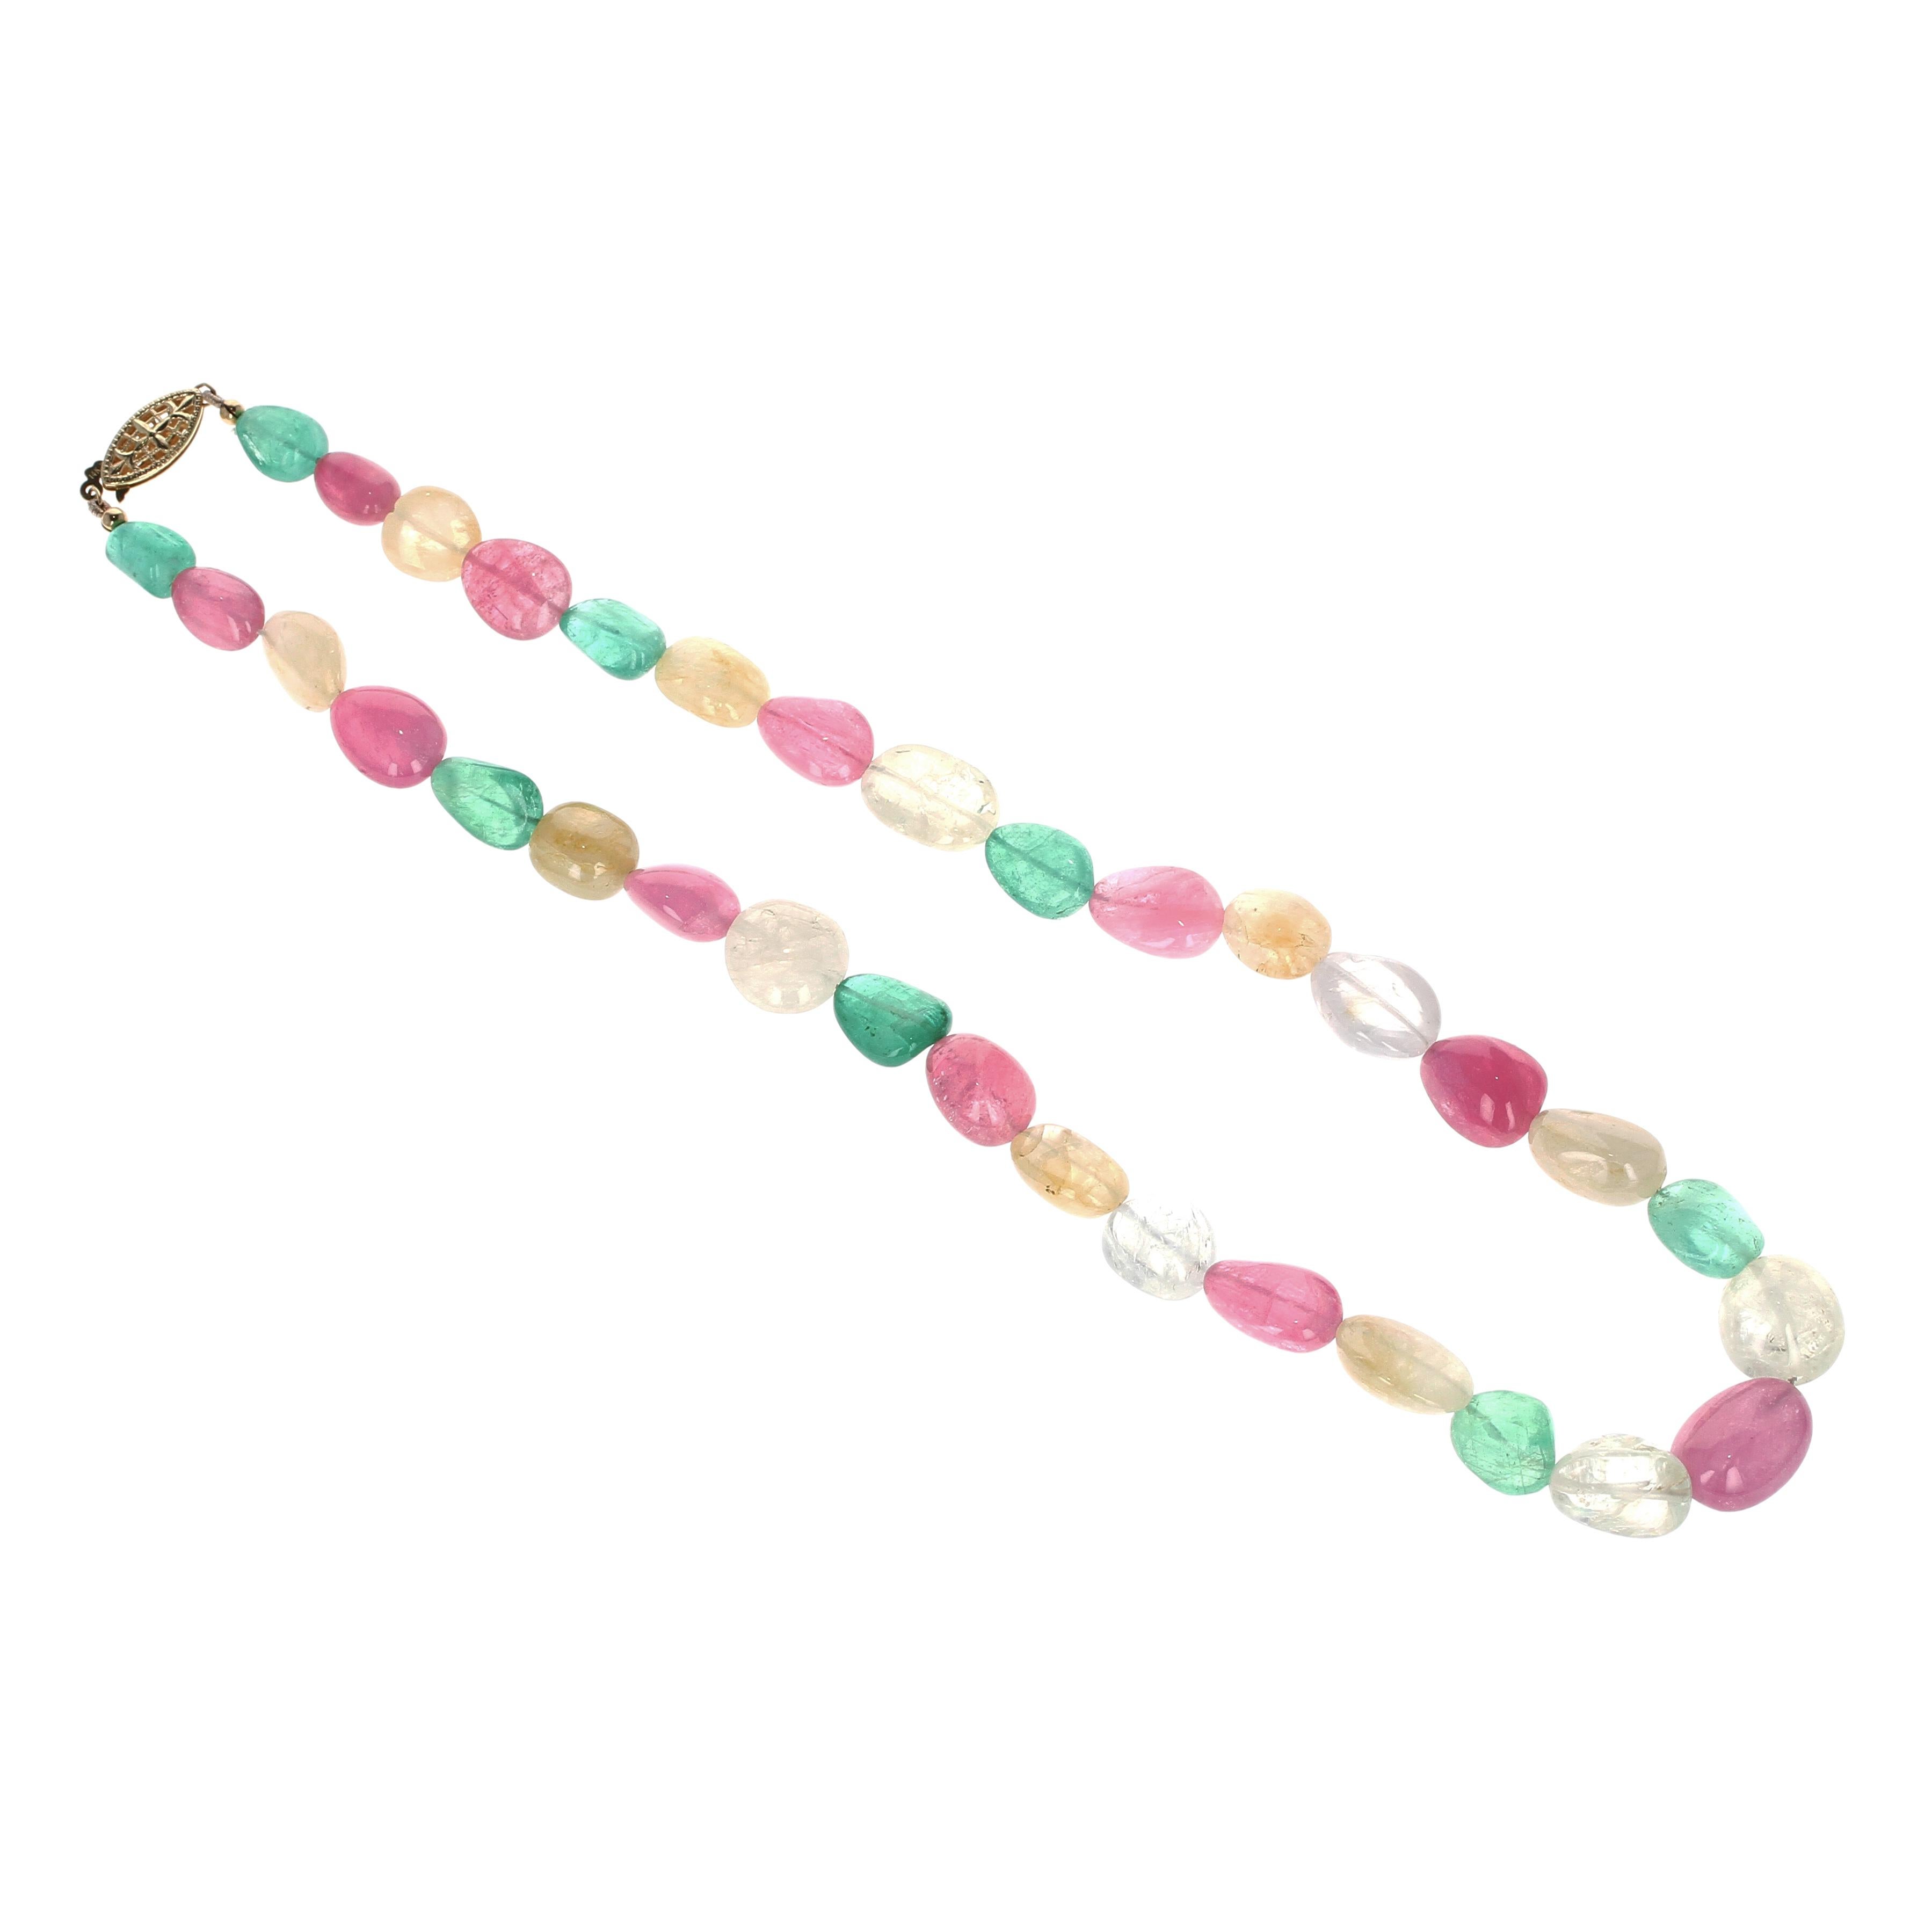 A uniquely and aesthetically matched bead necklace of emerald, yellow sapphire, and pink tourmaline strung in a single row clasped with 14kt yellow gold; the necklace weighs approximately 305.70 carats and measures 18 inches in length.
